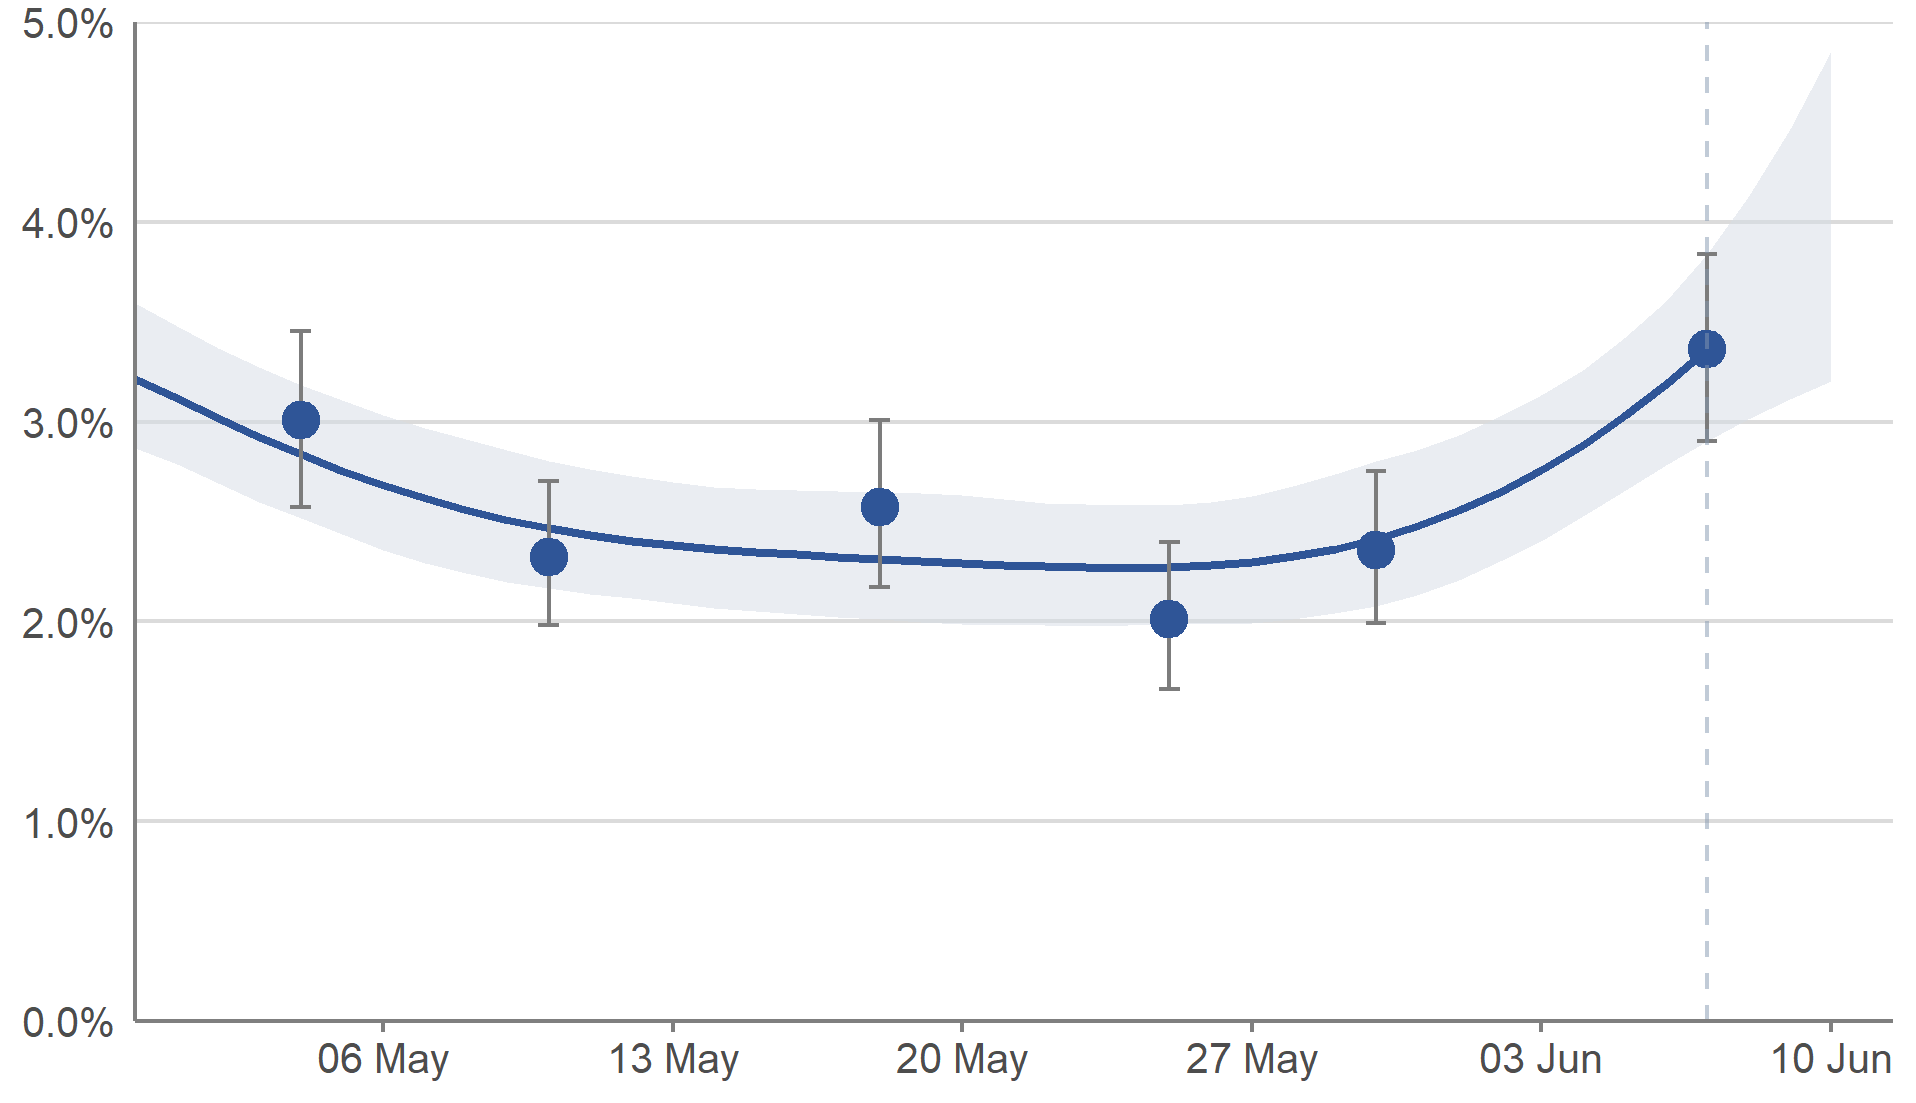 A chart showing estimates of the percentage of the population in Scotland testing positive for COVID-19 between 30 April 2022 and 10 June 2022. Modelled daily estimates are represented by a blue line with 95% credible intervals in pale blue shading, and official reported weekly estimates are represented by blue dots with whiskers showing the 95% credible intervals. A vertical dashed line near the end of the series indicates greater uncertainty in estimates for the last three reported days. The estimated percentage of people testing positive for COVID-19 increased in the most recent week.